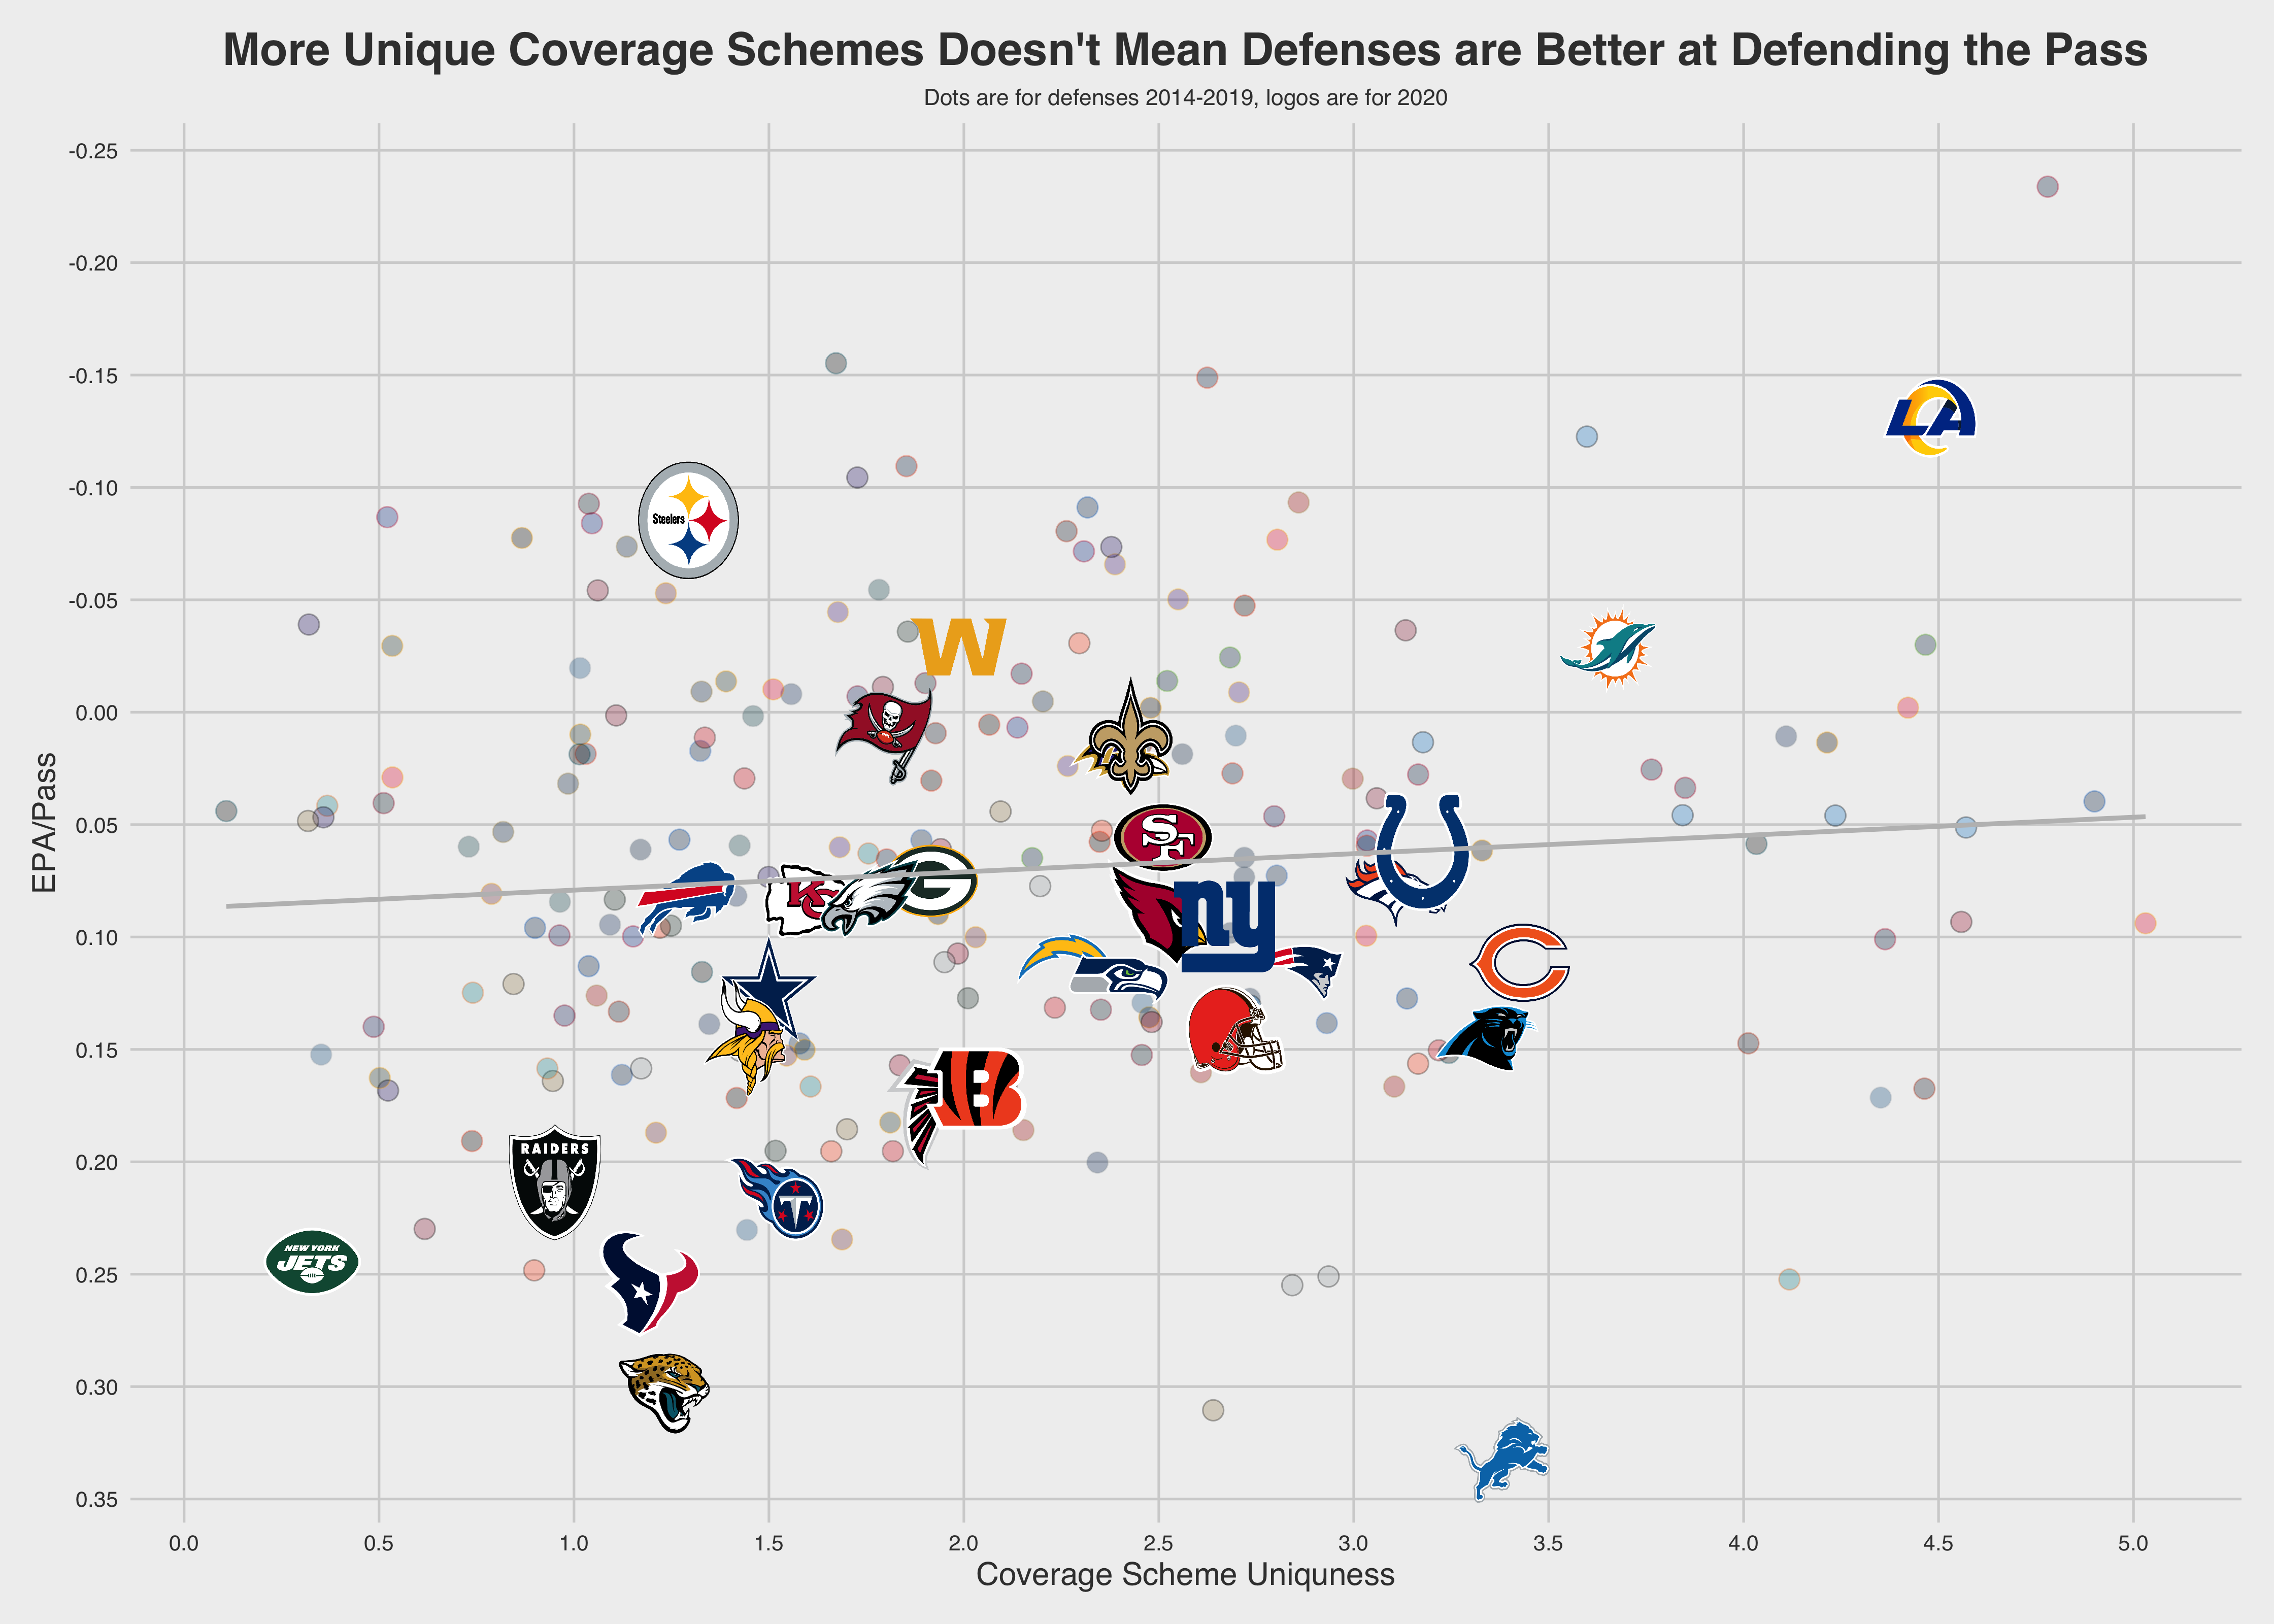 PFF Data Study Coverage scheme uniqueness for each team and what that